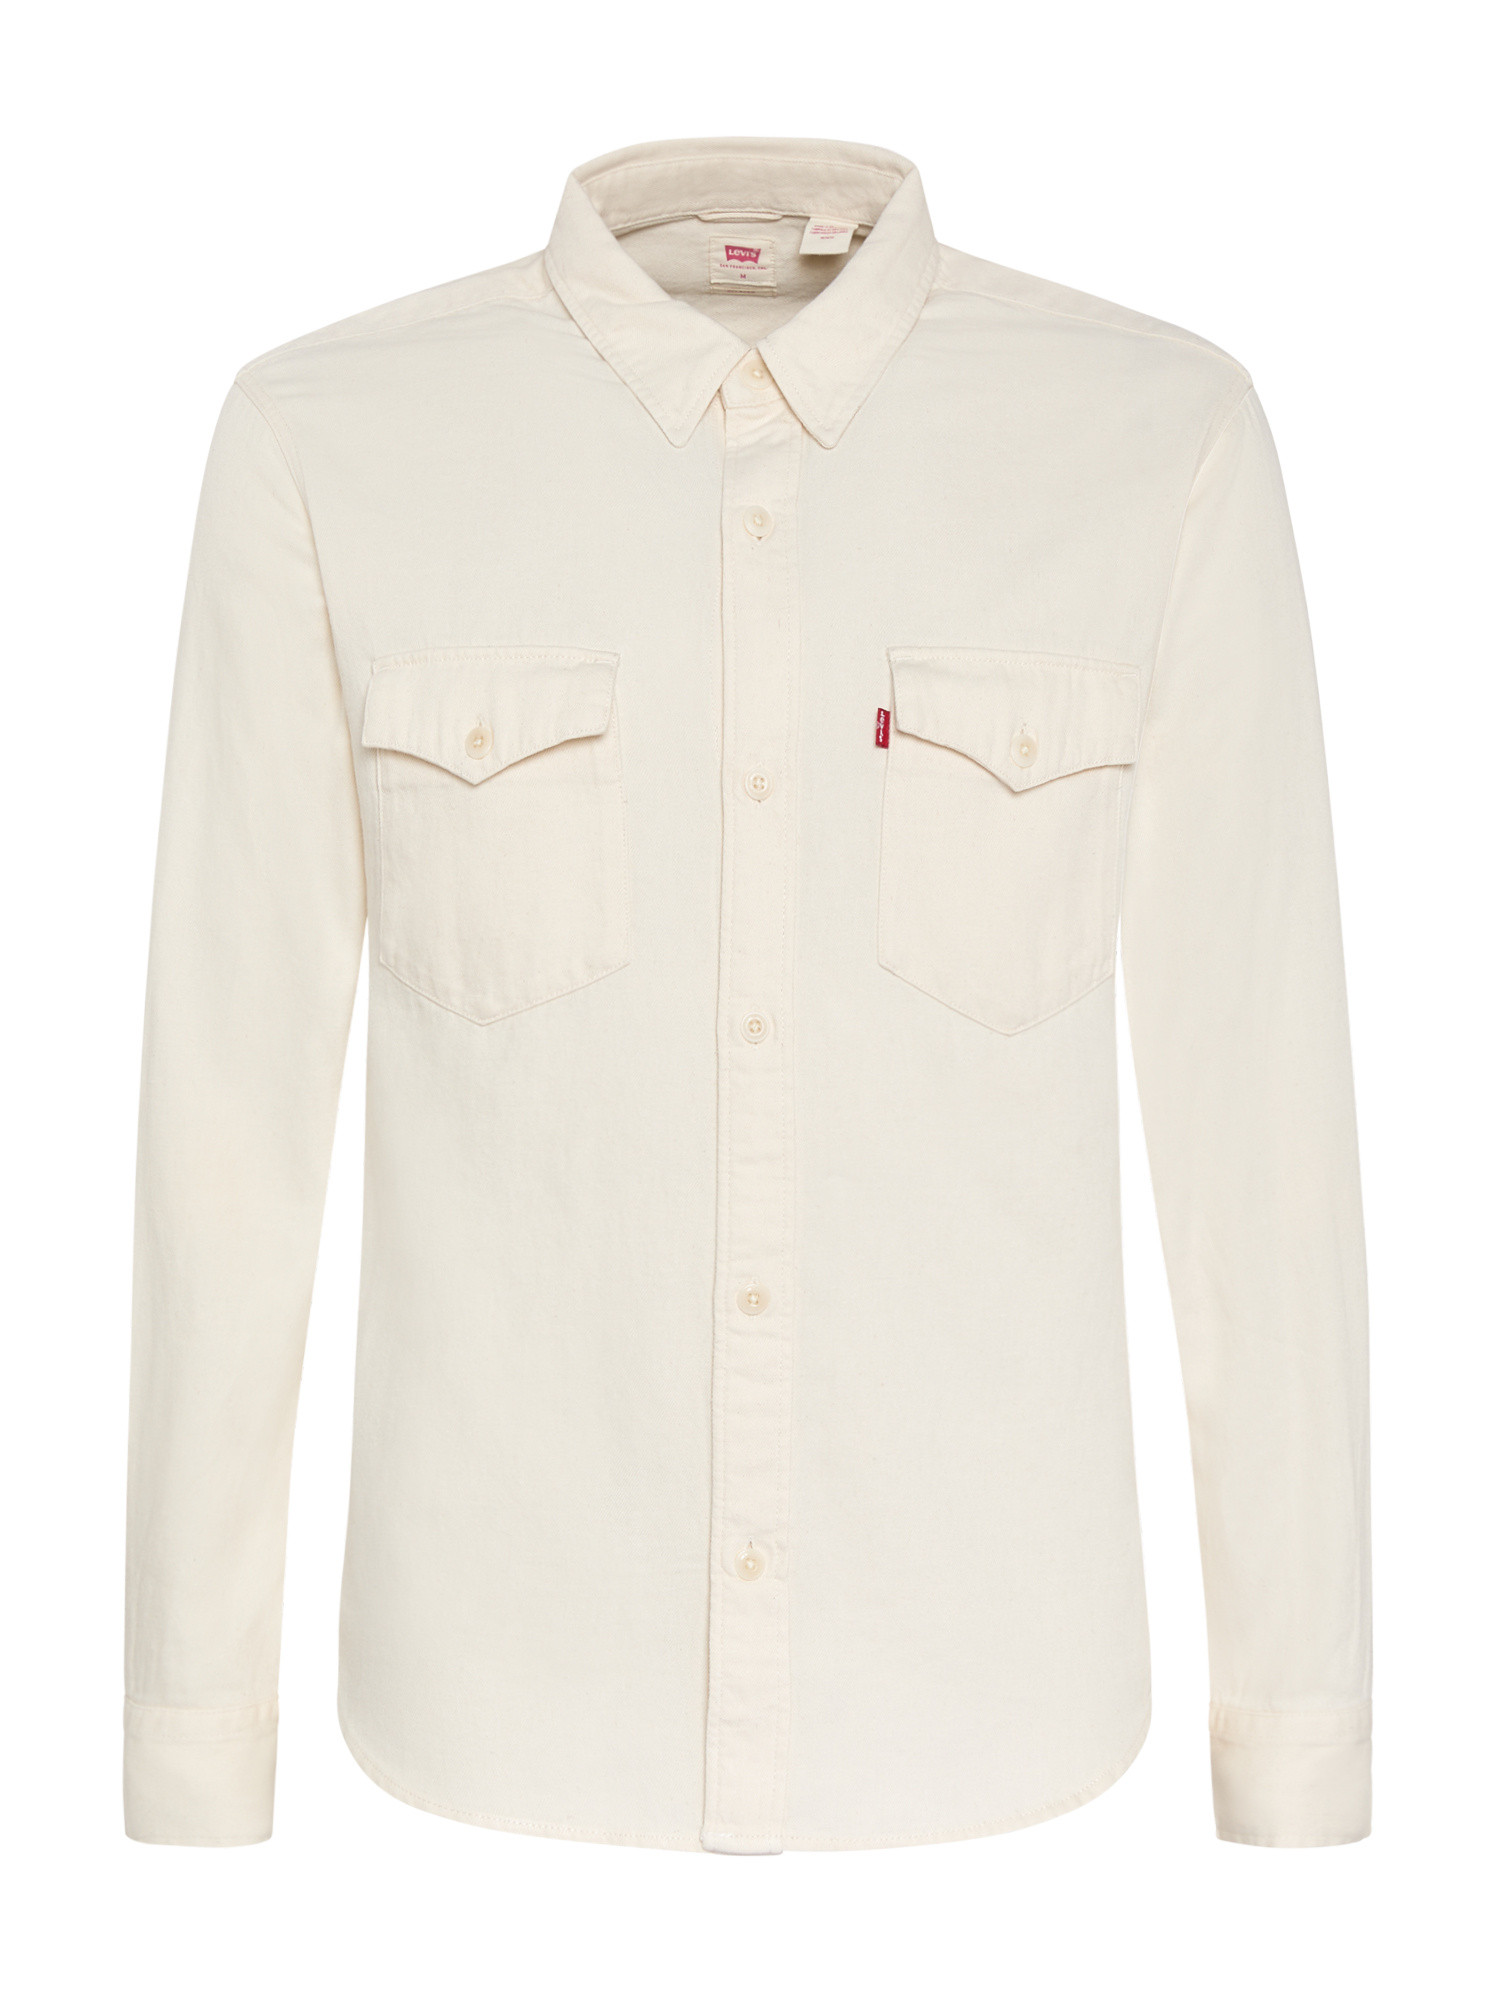 Levi's - Camicia relaxed fit in misto lino, Bianco panna, large image number 0